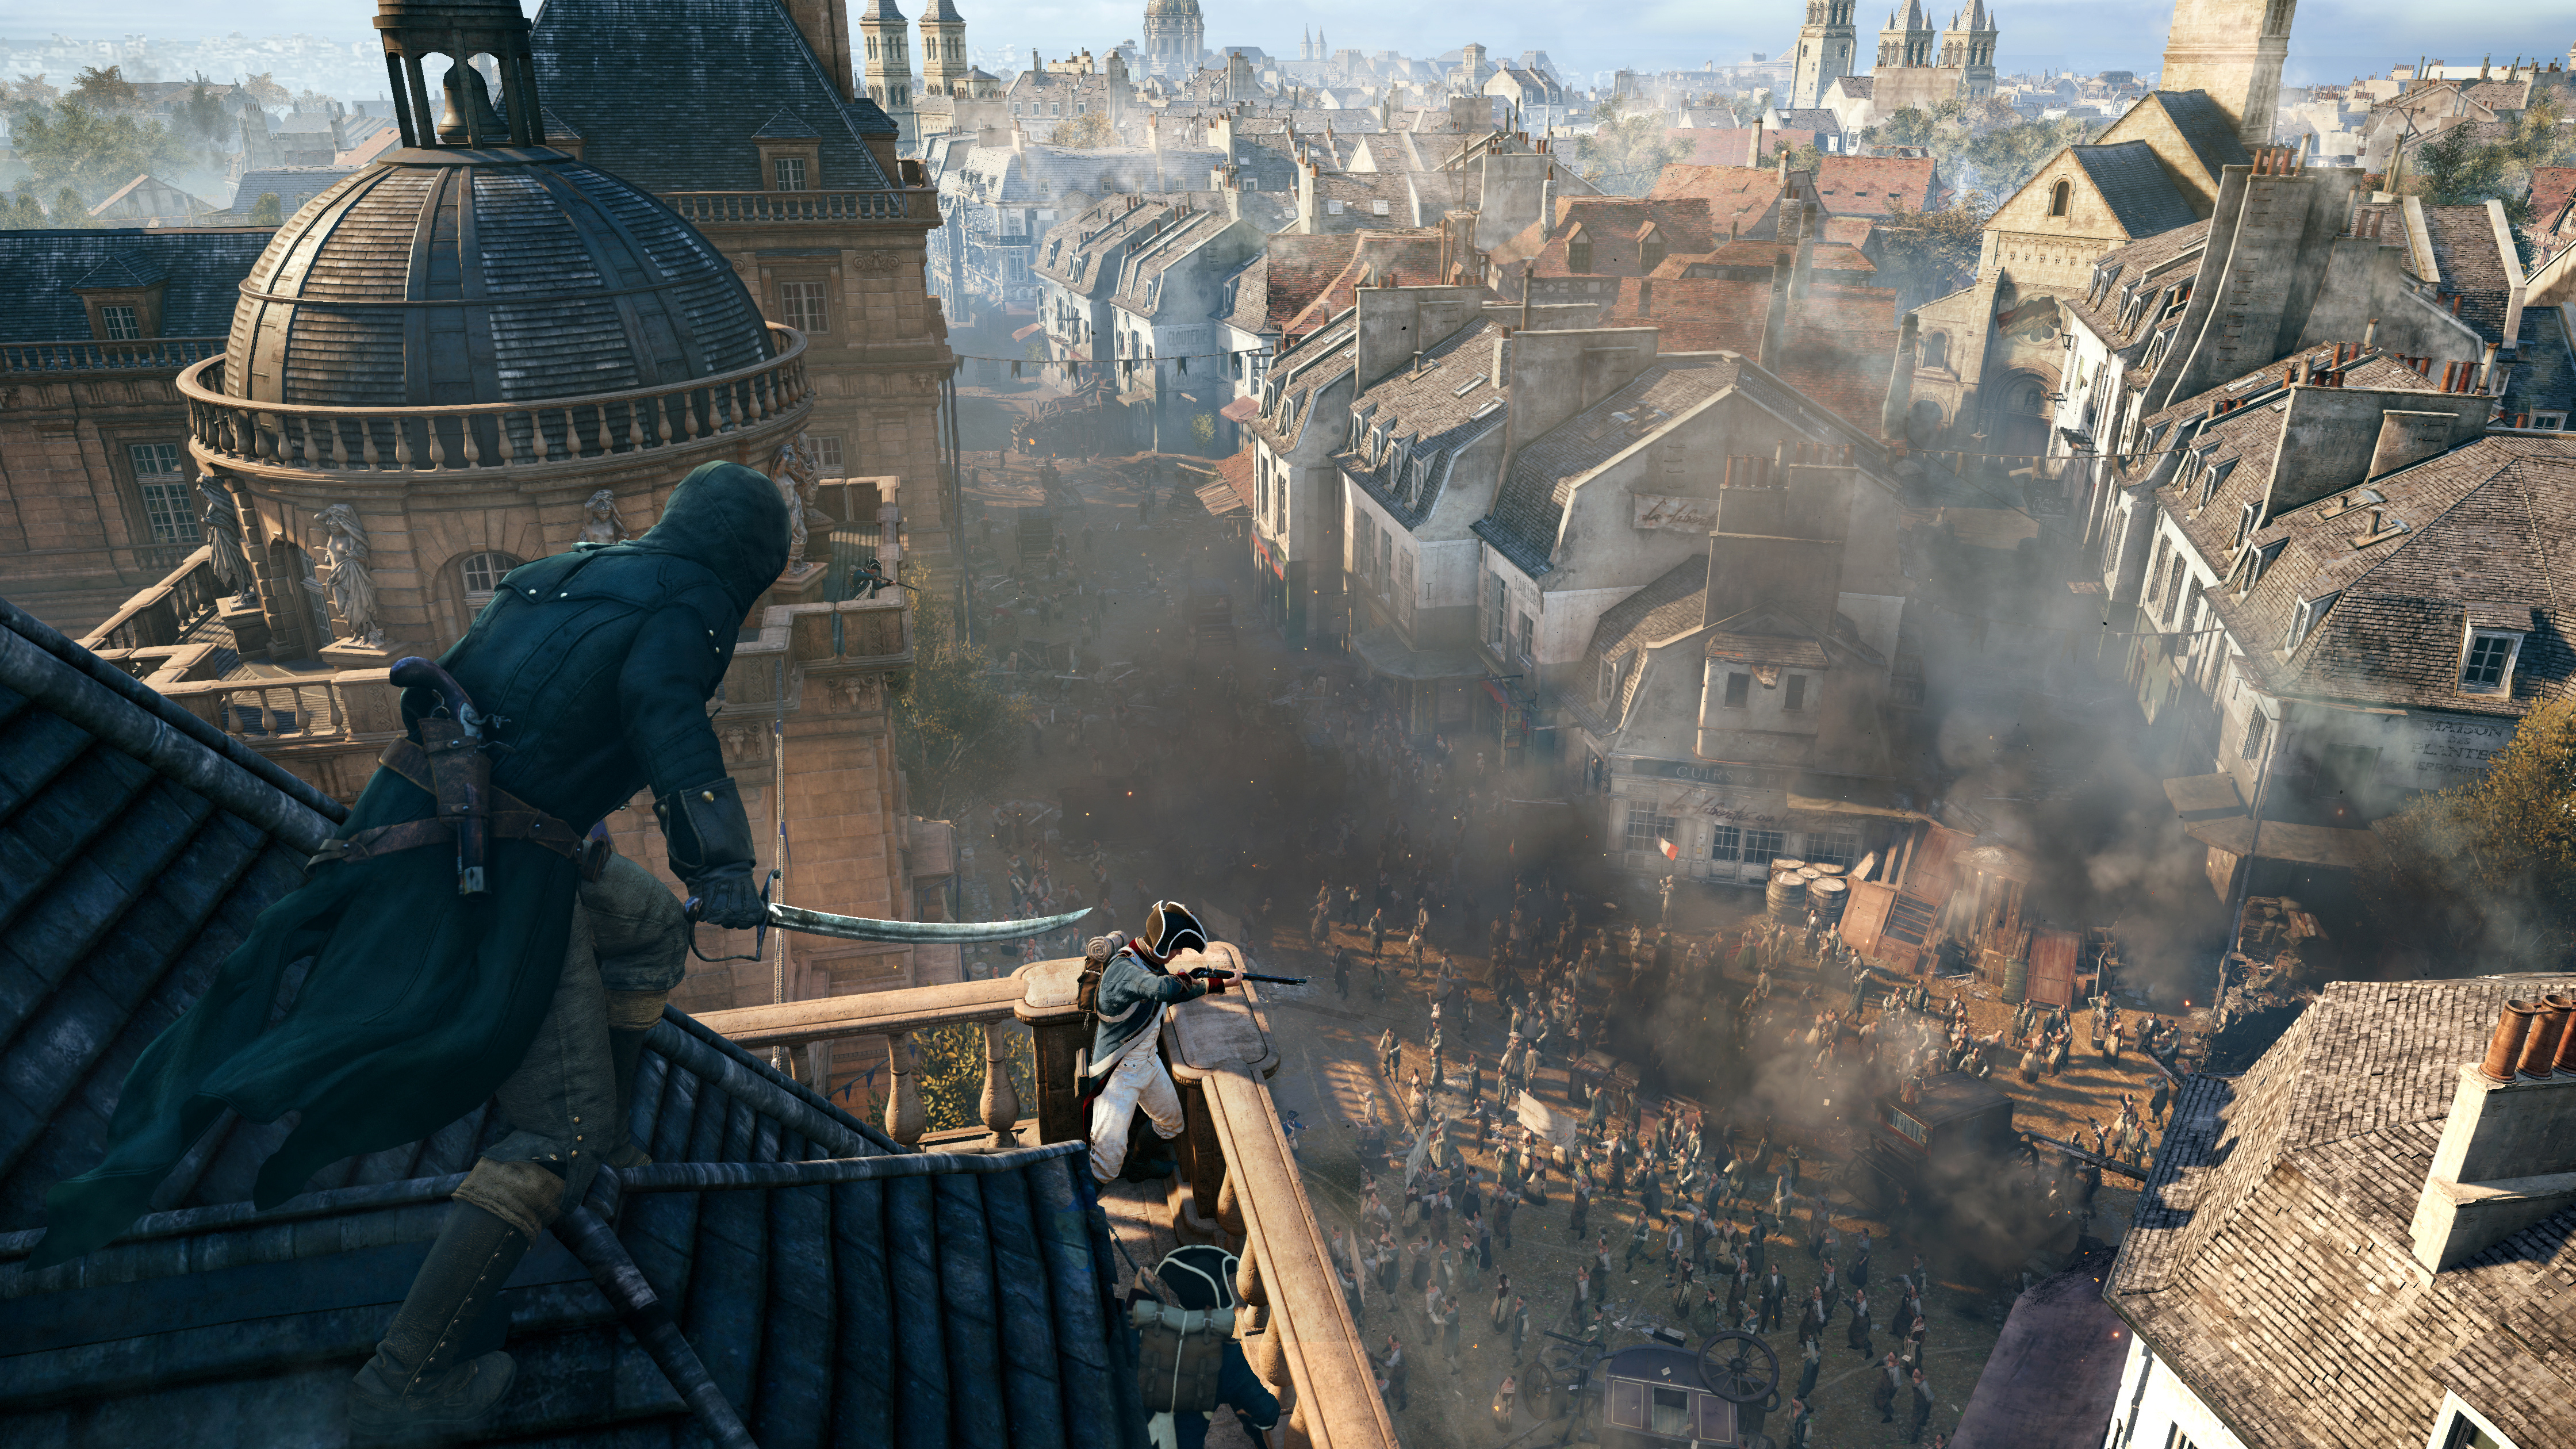 https://www.nordichardware.se/images/galleries/Spel/Assassins%20Creed%20Unity/ACU_Screenshot_LuxembourgRiot.jpg